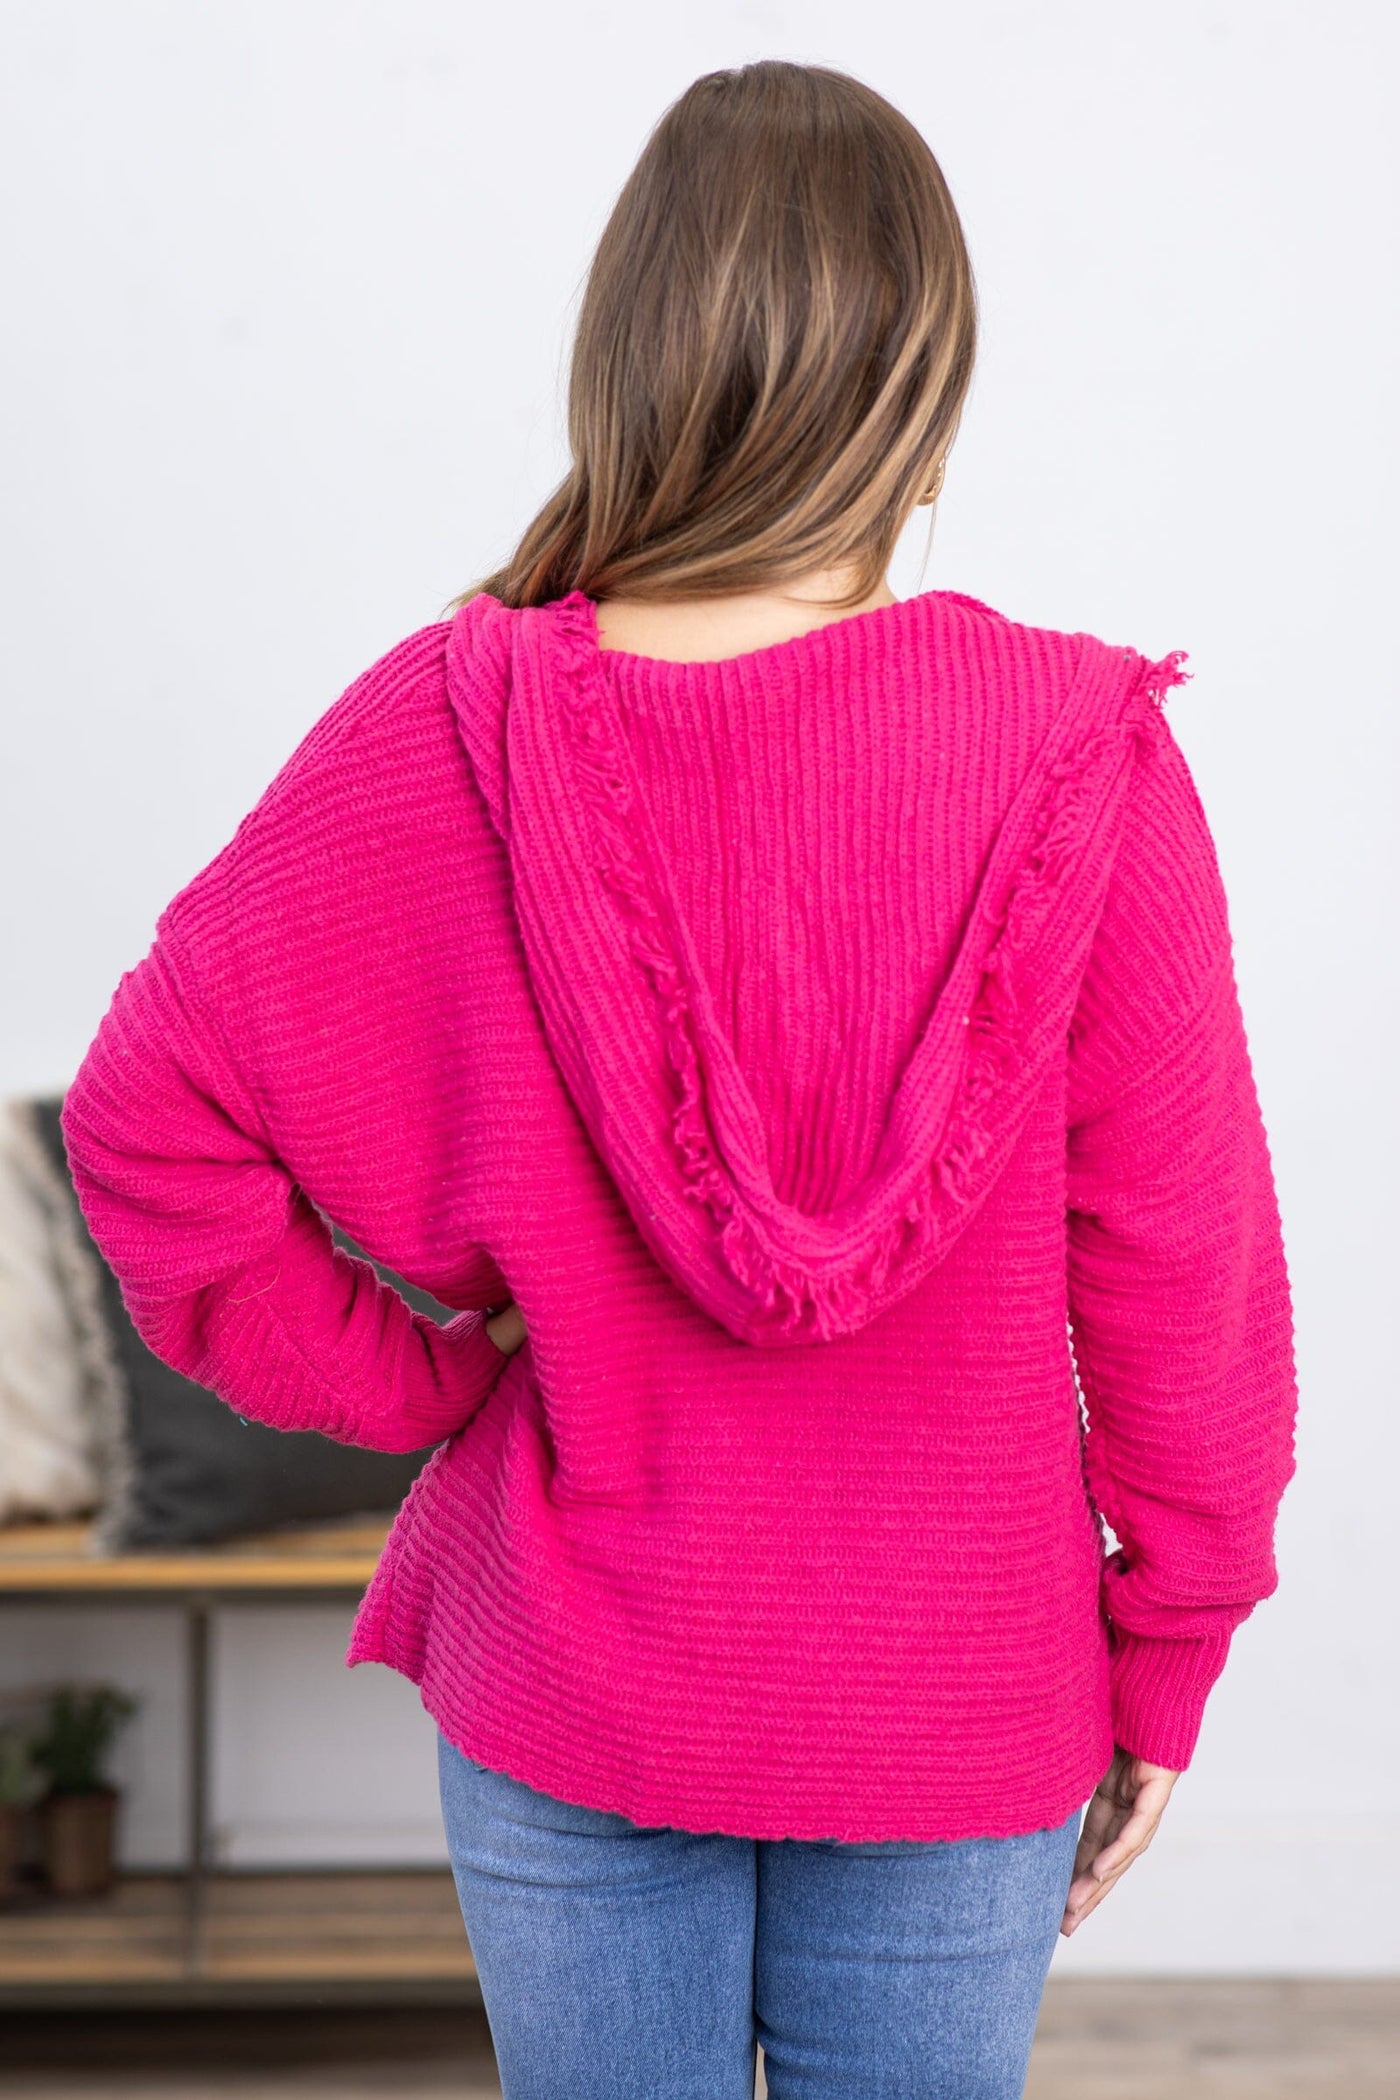 Hot Pink Hooded Sweater With Fringe - Filly Flair